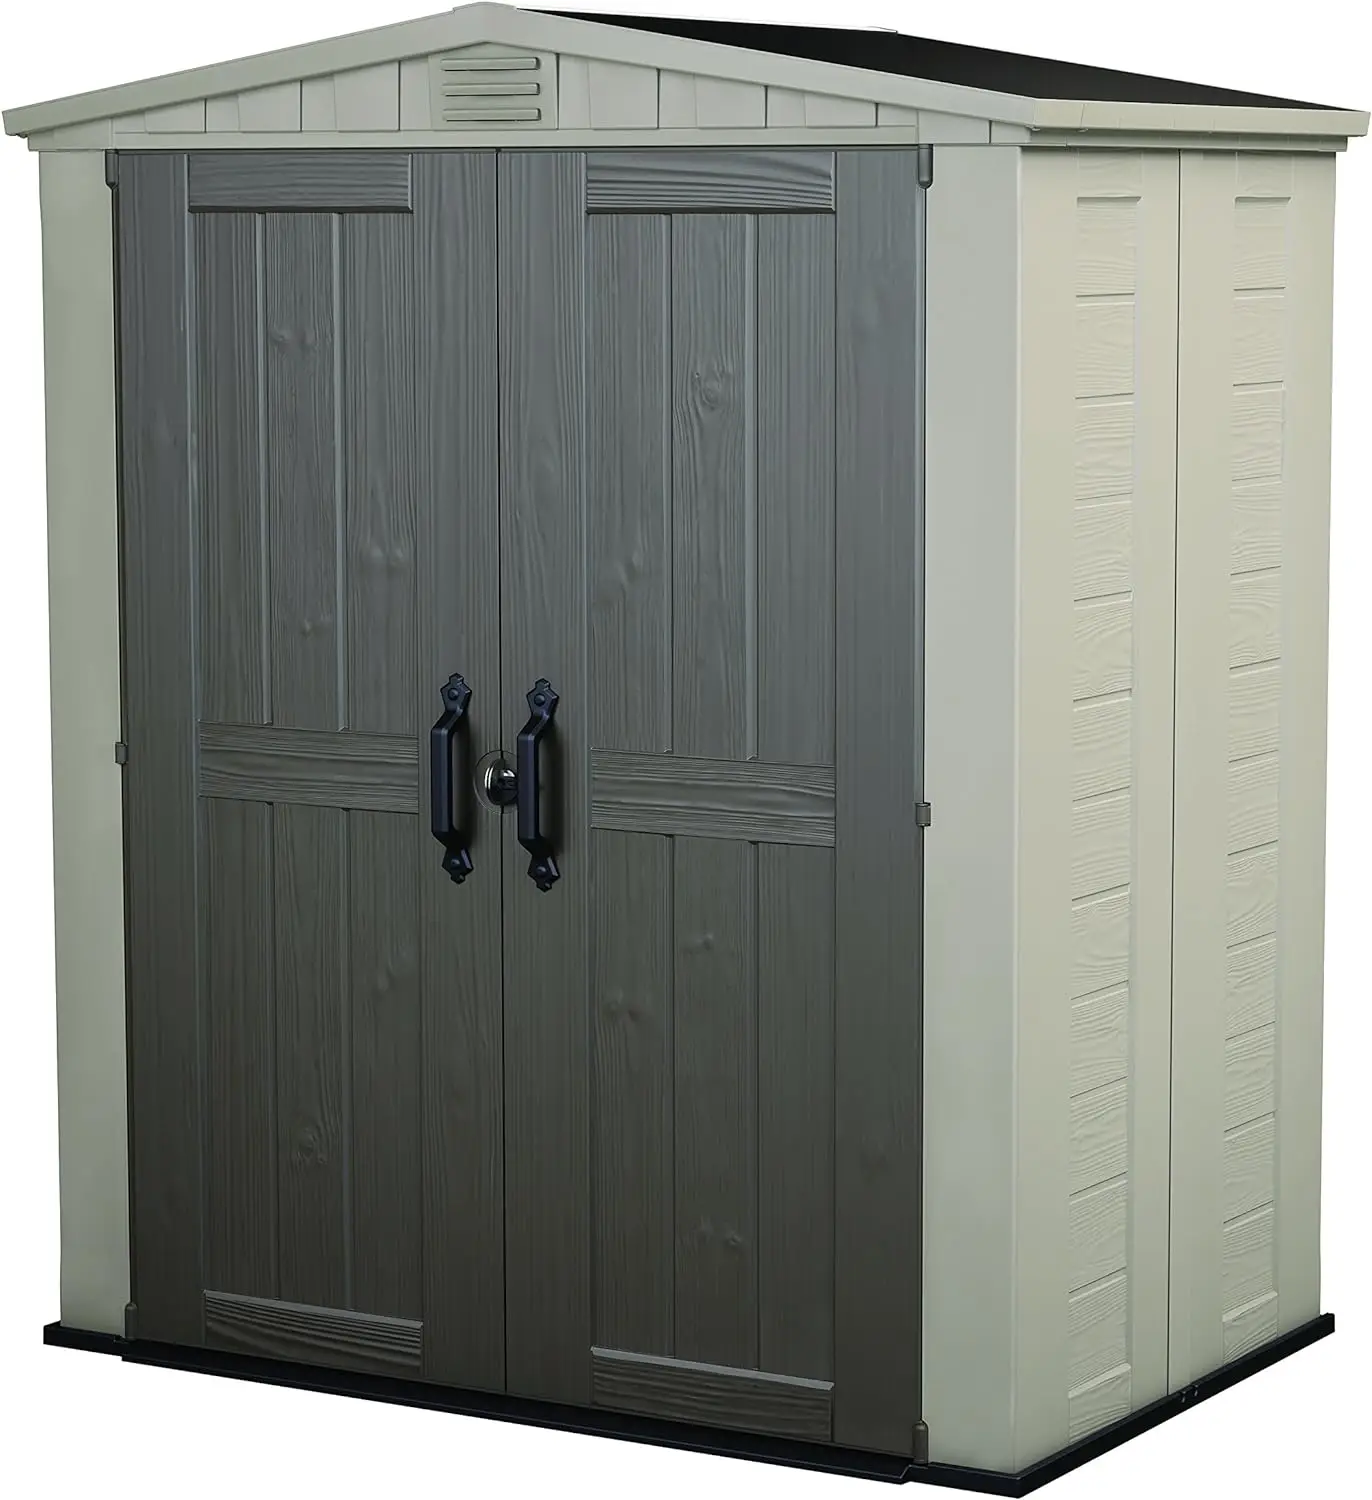 

6x3 Outdoor Storage Shed Kit-Perfect to Store Patio Furniture, Garden Tools Bike Accessories, Beach Chairs and Push Lawn Mower,